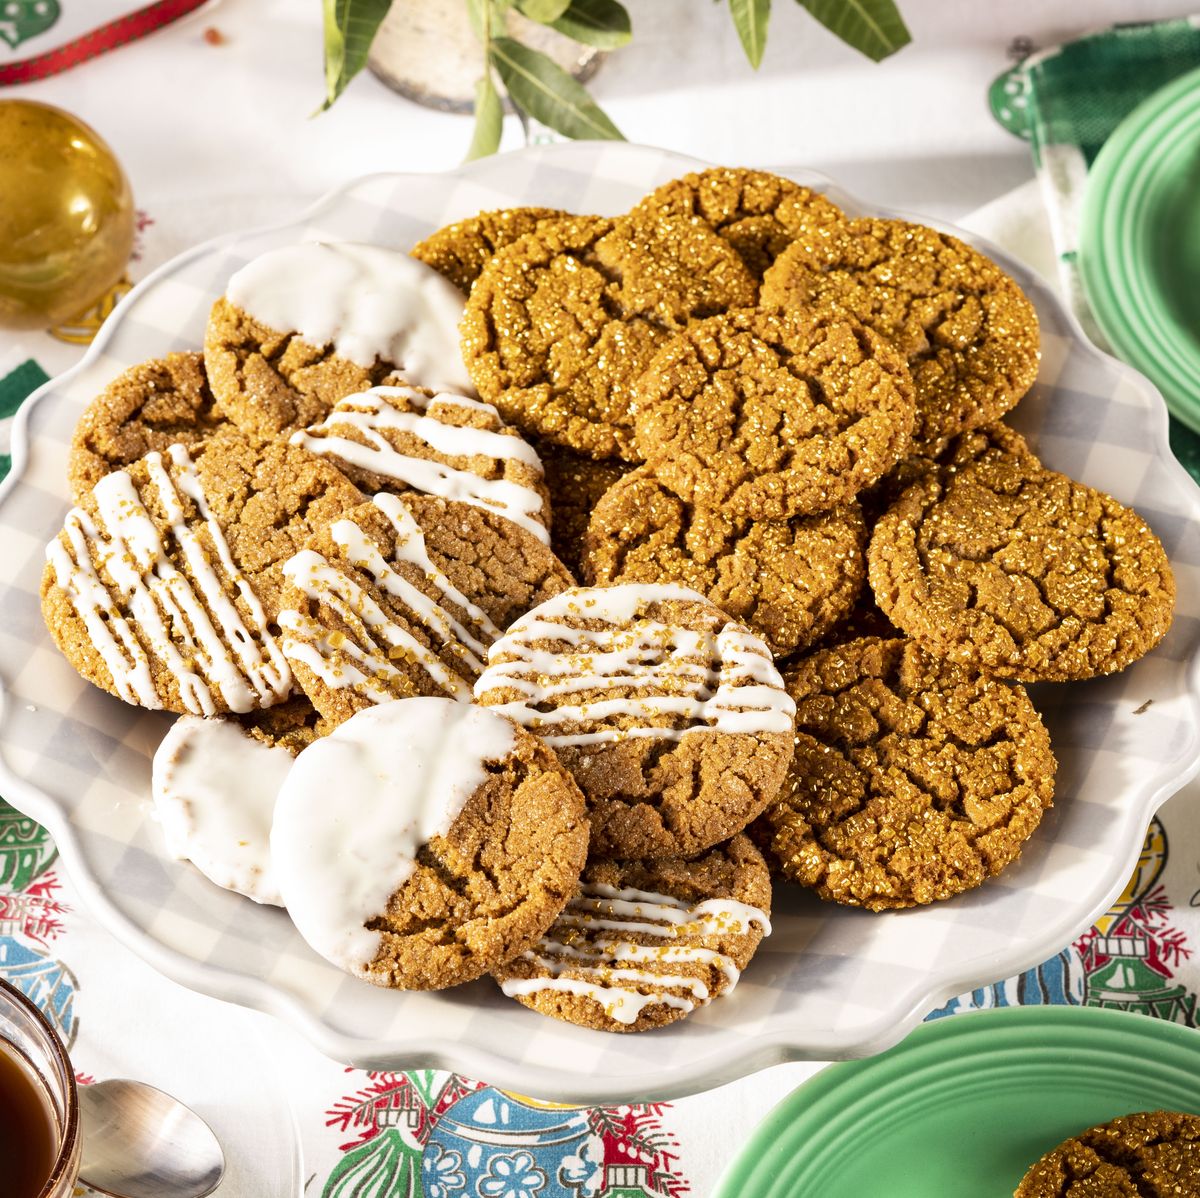 the pioneer woman's spicy molasses cookies recipe